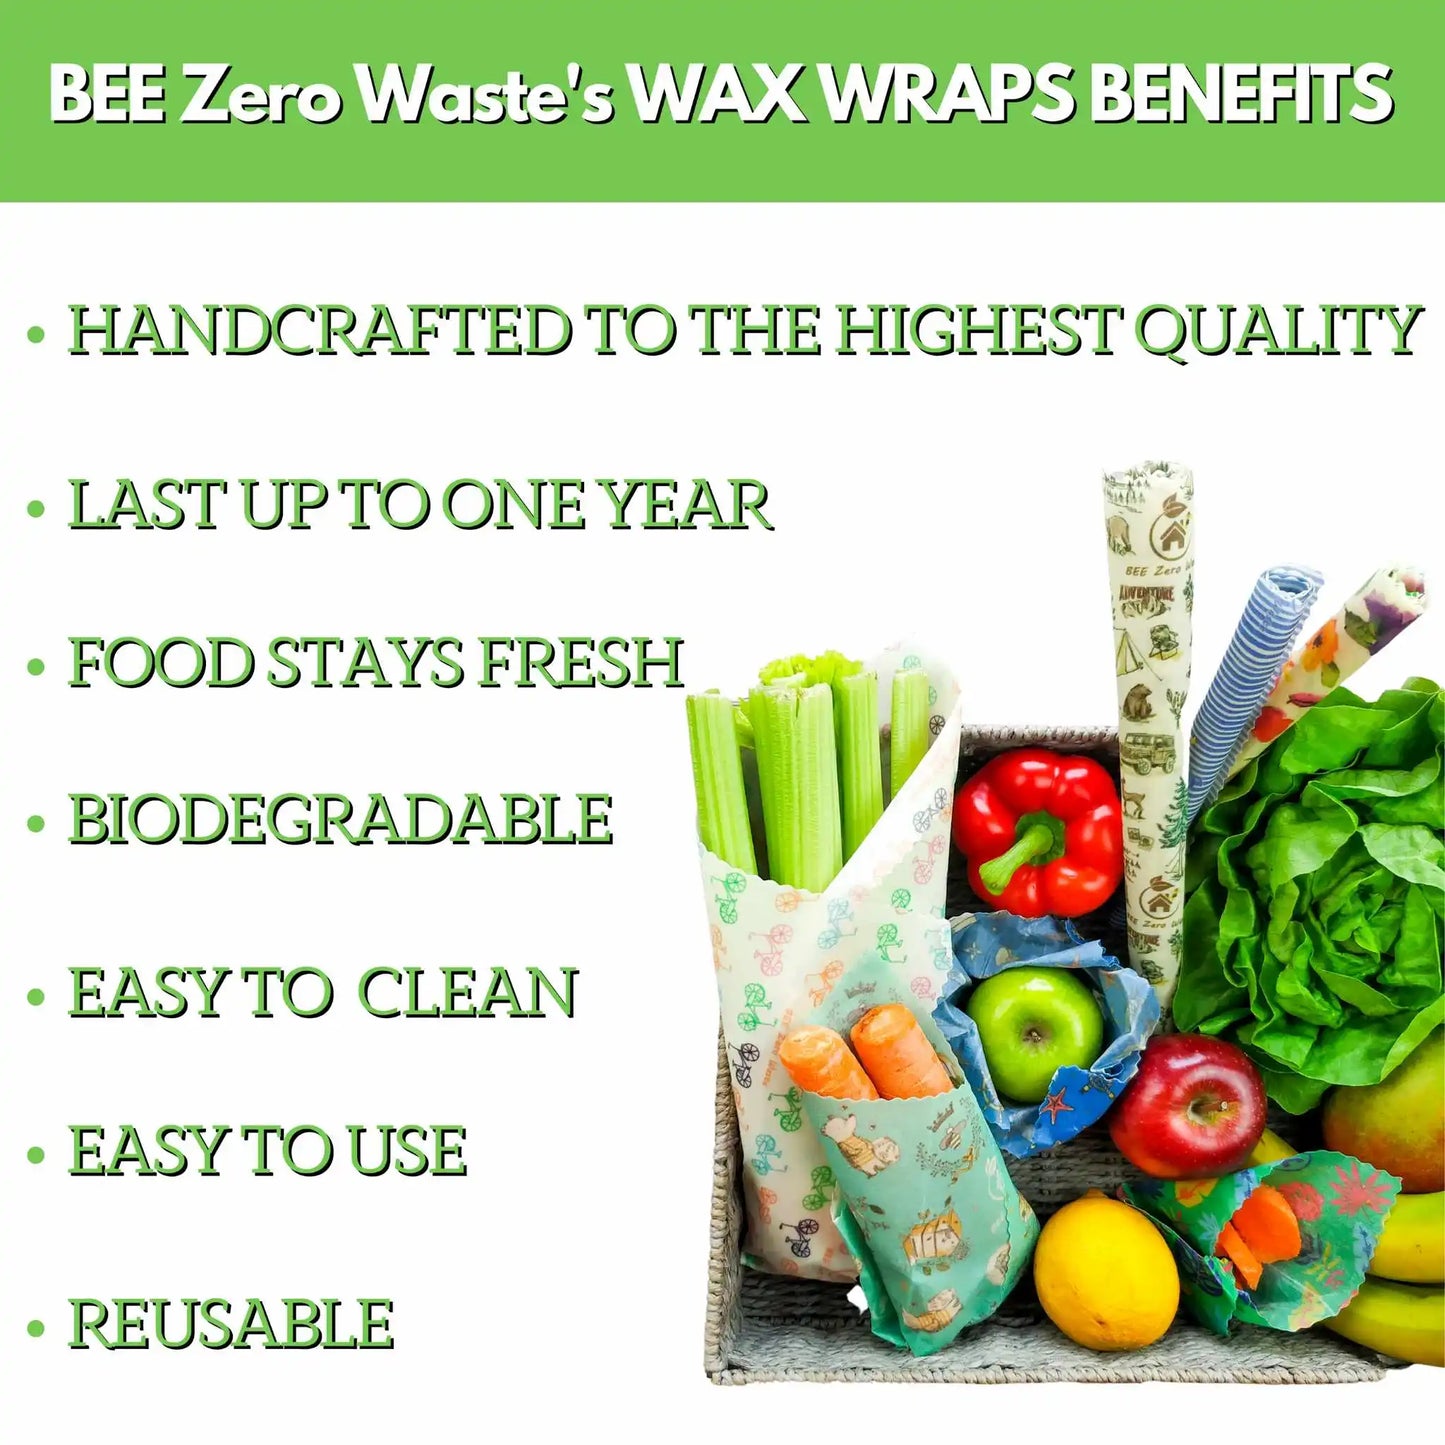 Handmade in the UK, a multipack of eco-friendly beeswax wraps for a plastic-free lifestyle.